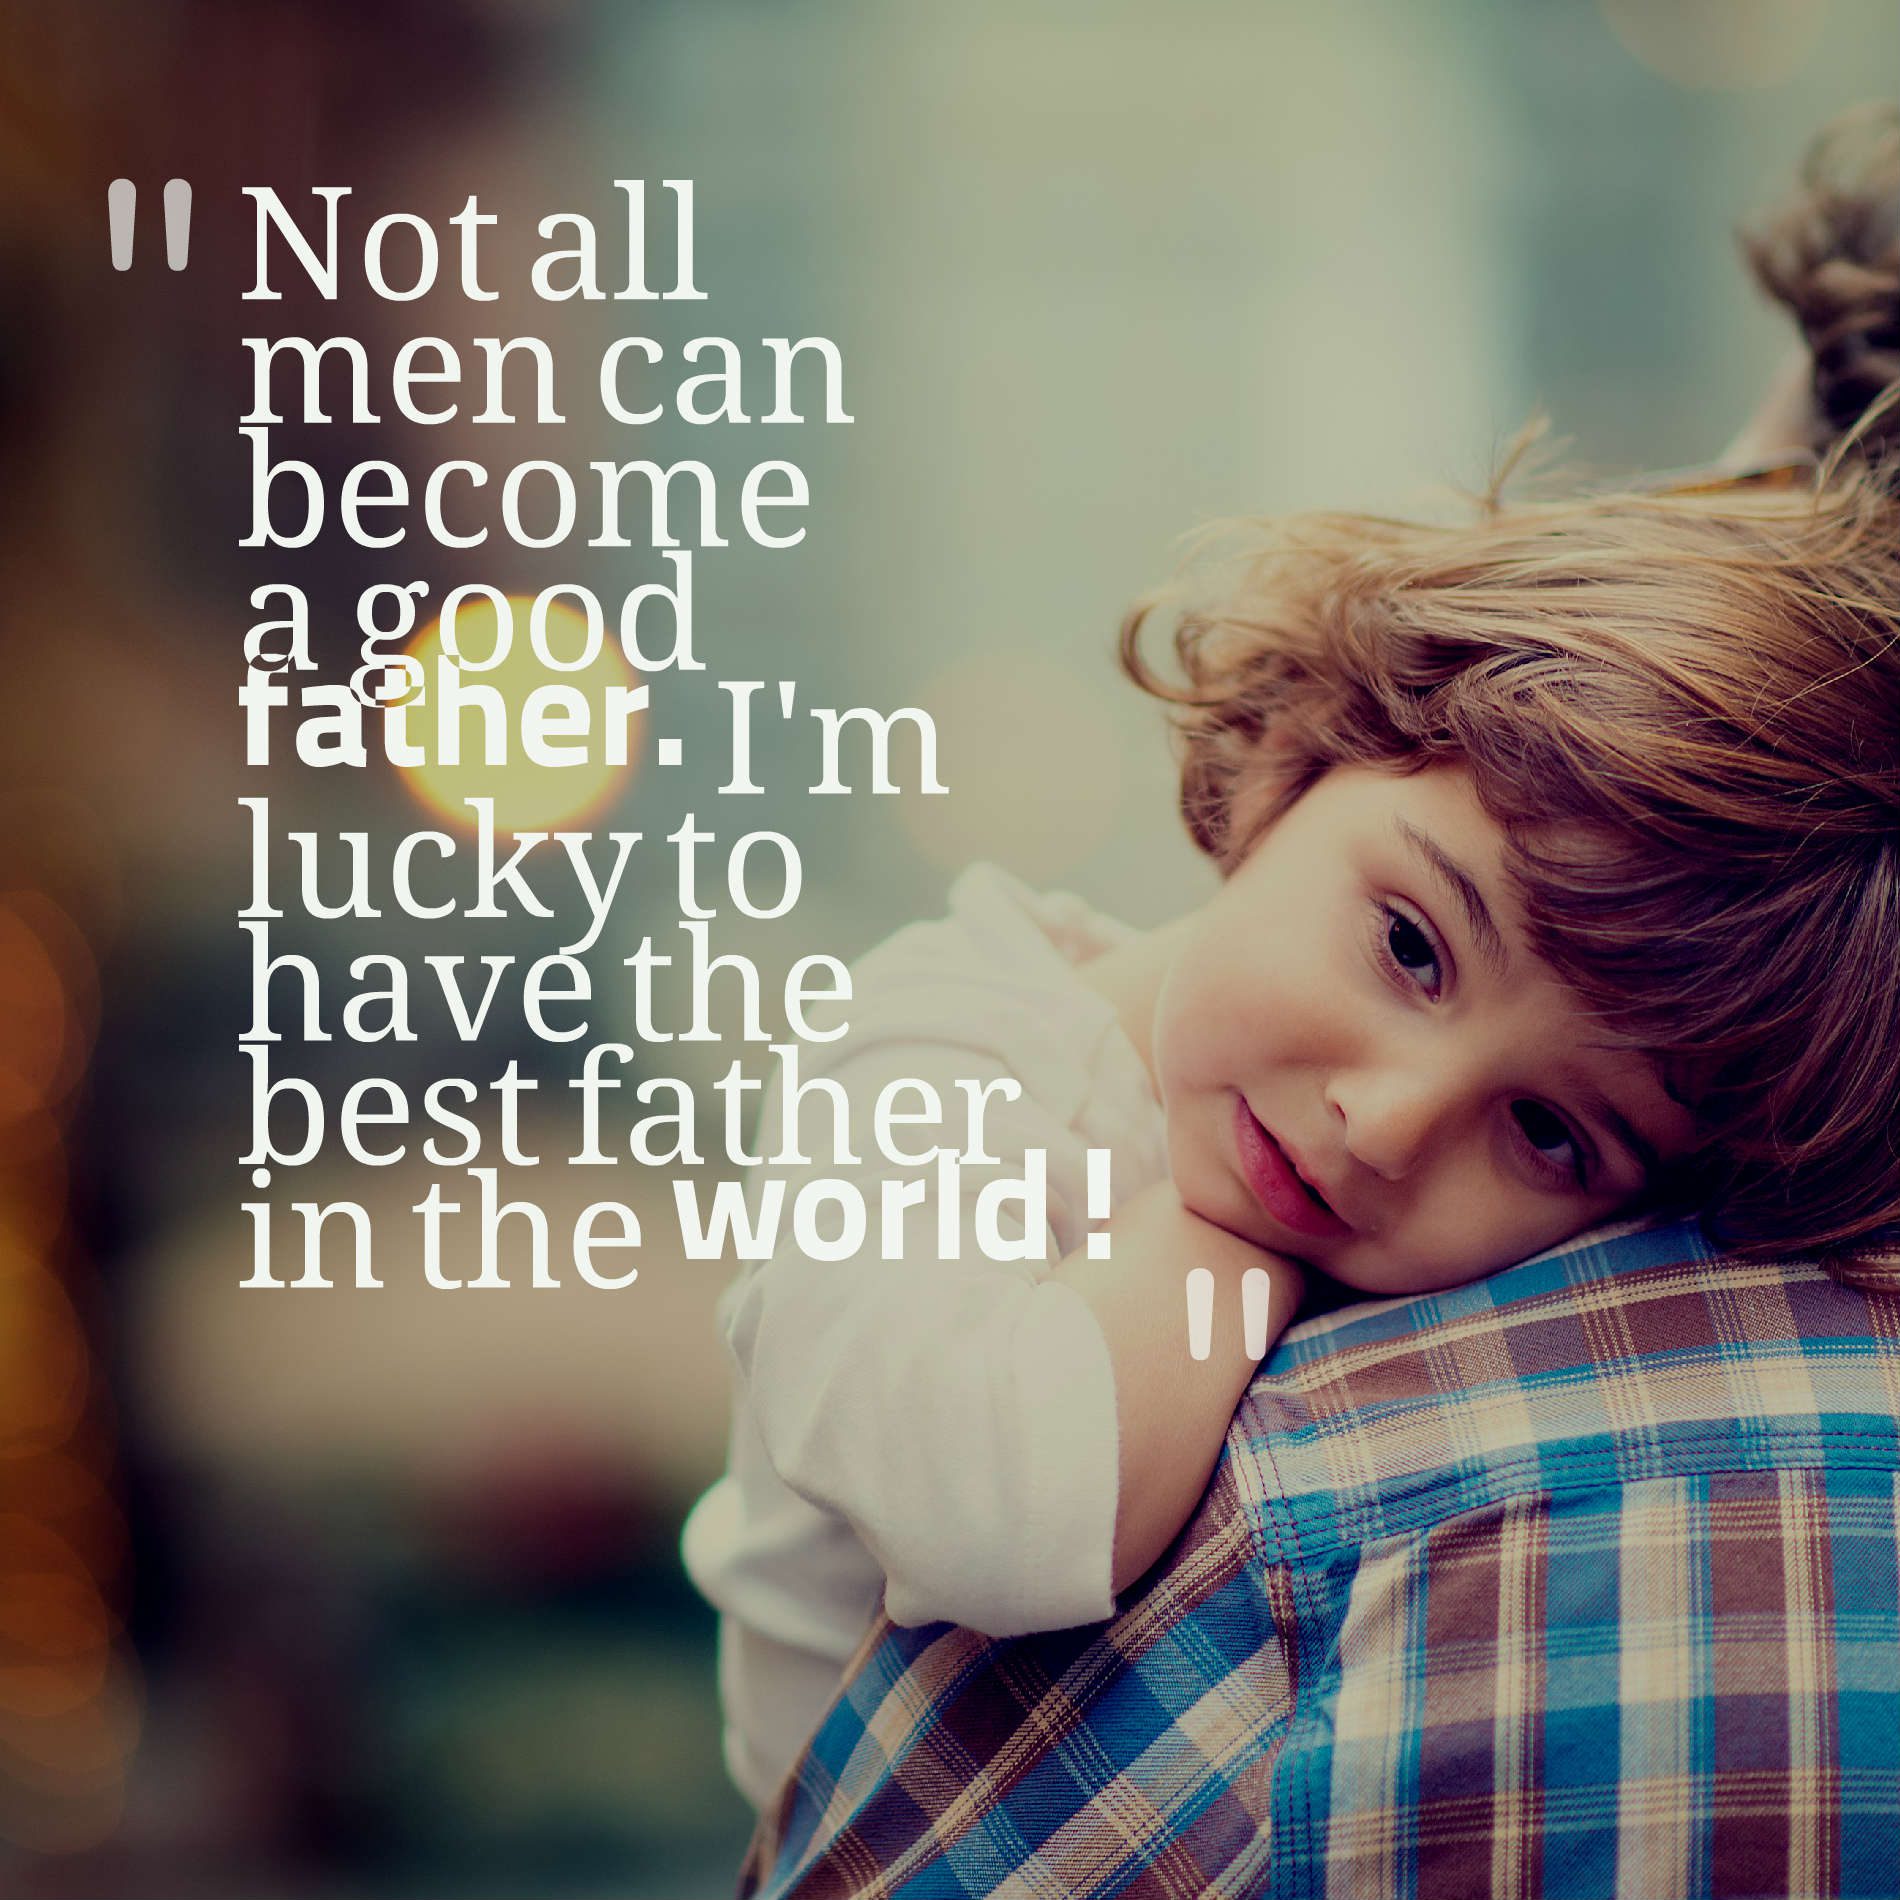 Not all men can become a good father. I'm lucky to have the best father in the world!